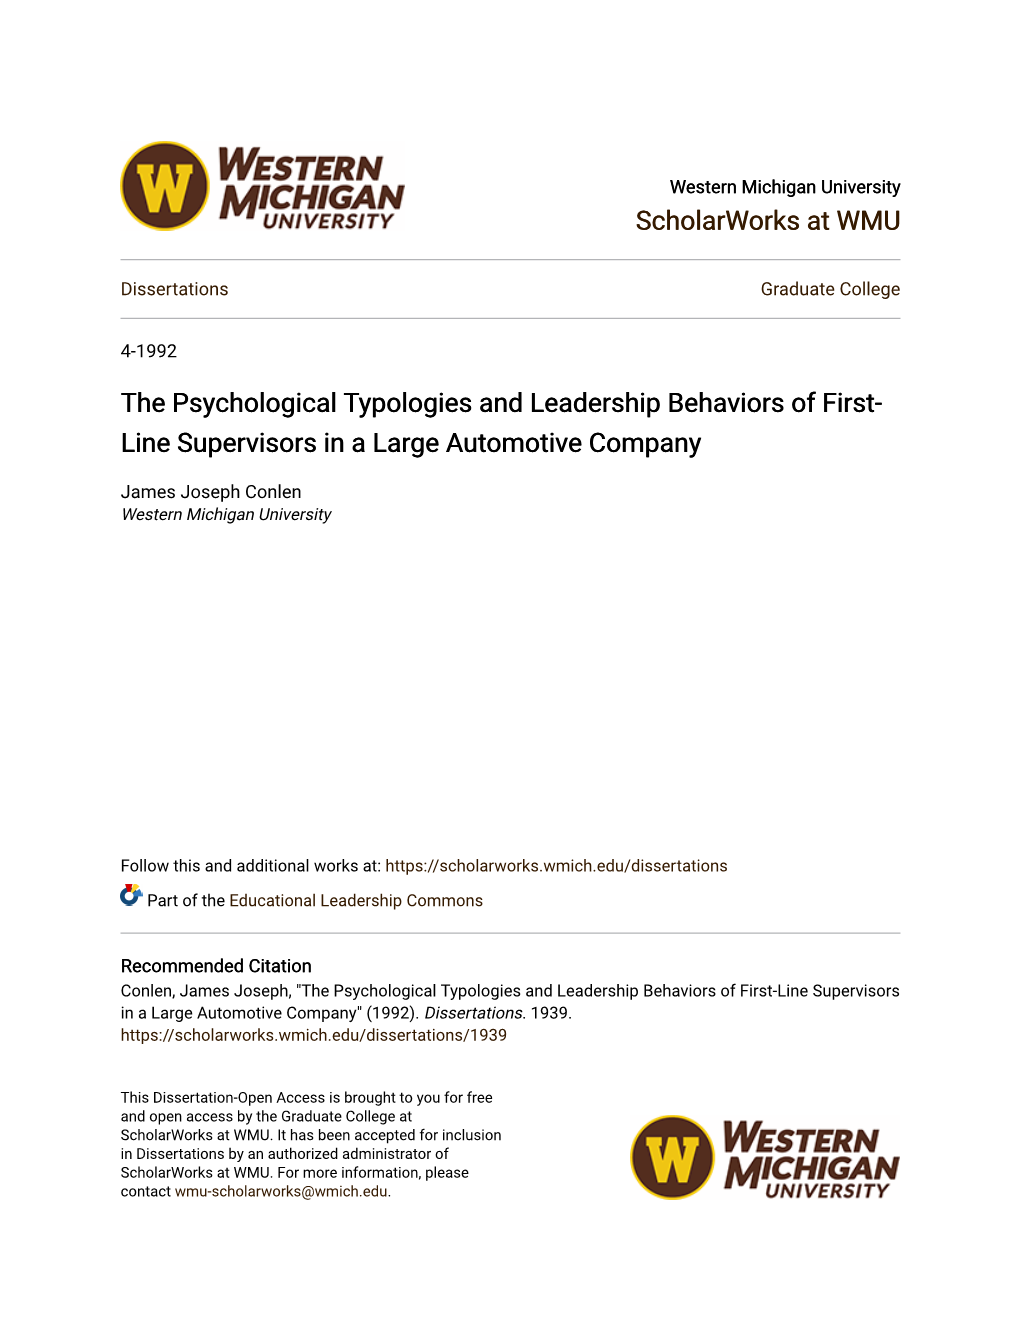 The Psychological Typologies and Leadership Behaviors of First-Line Supervisors in a Large Automotive Company" (1992)